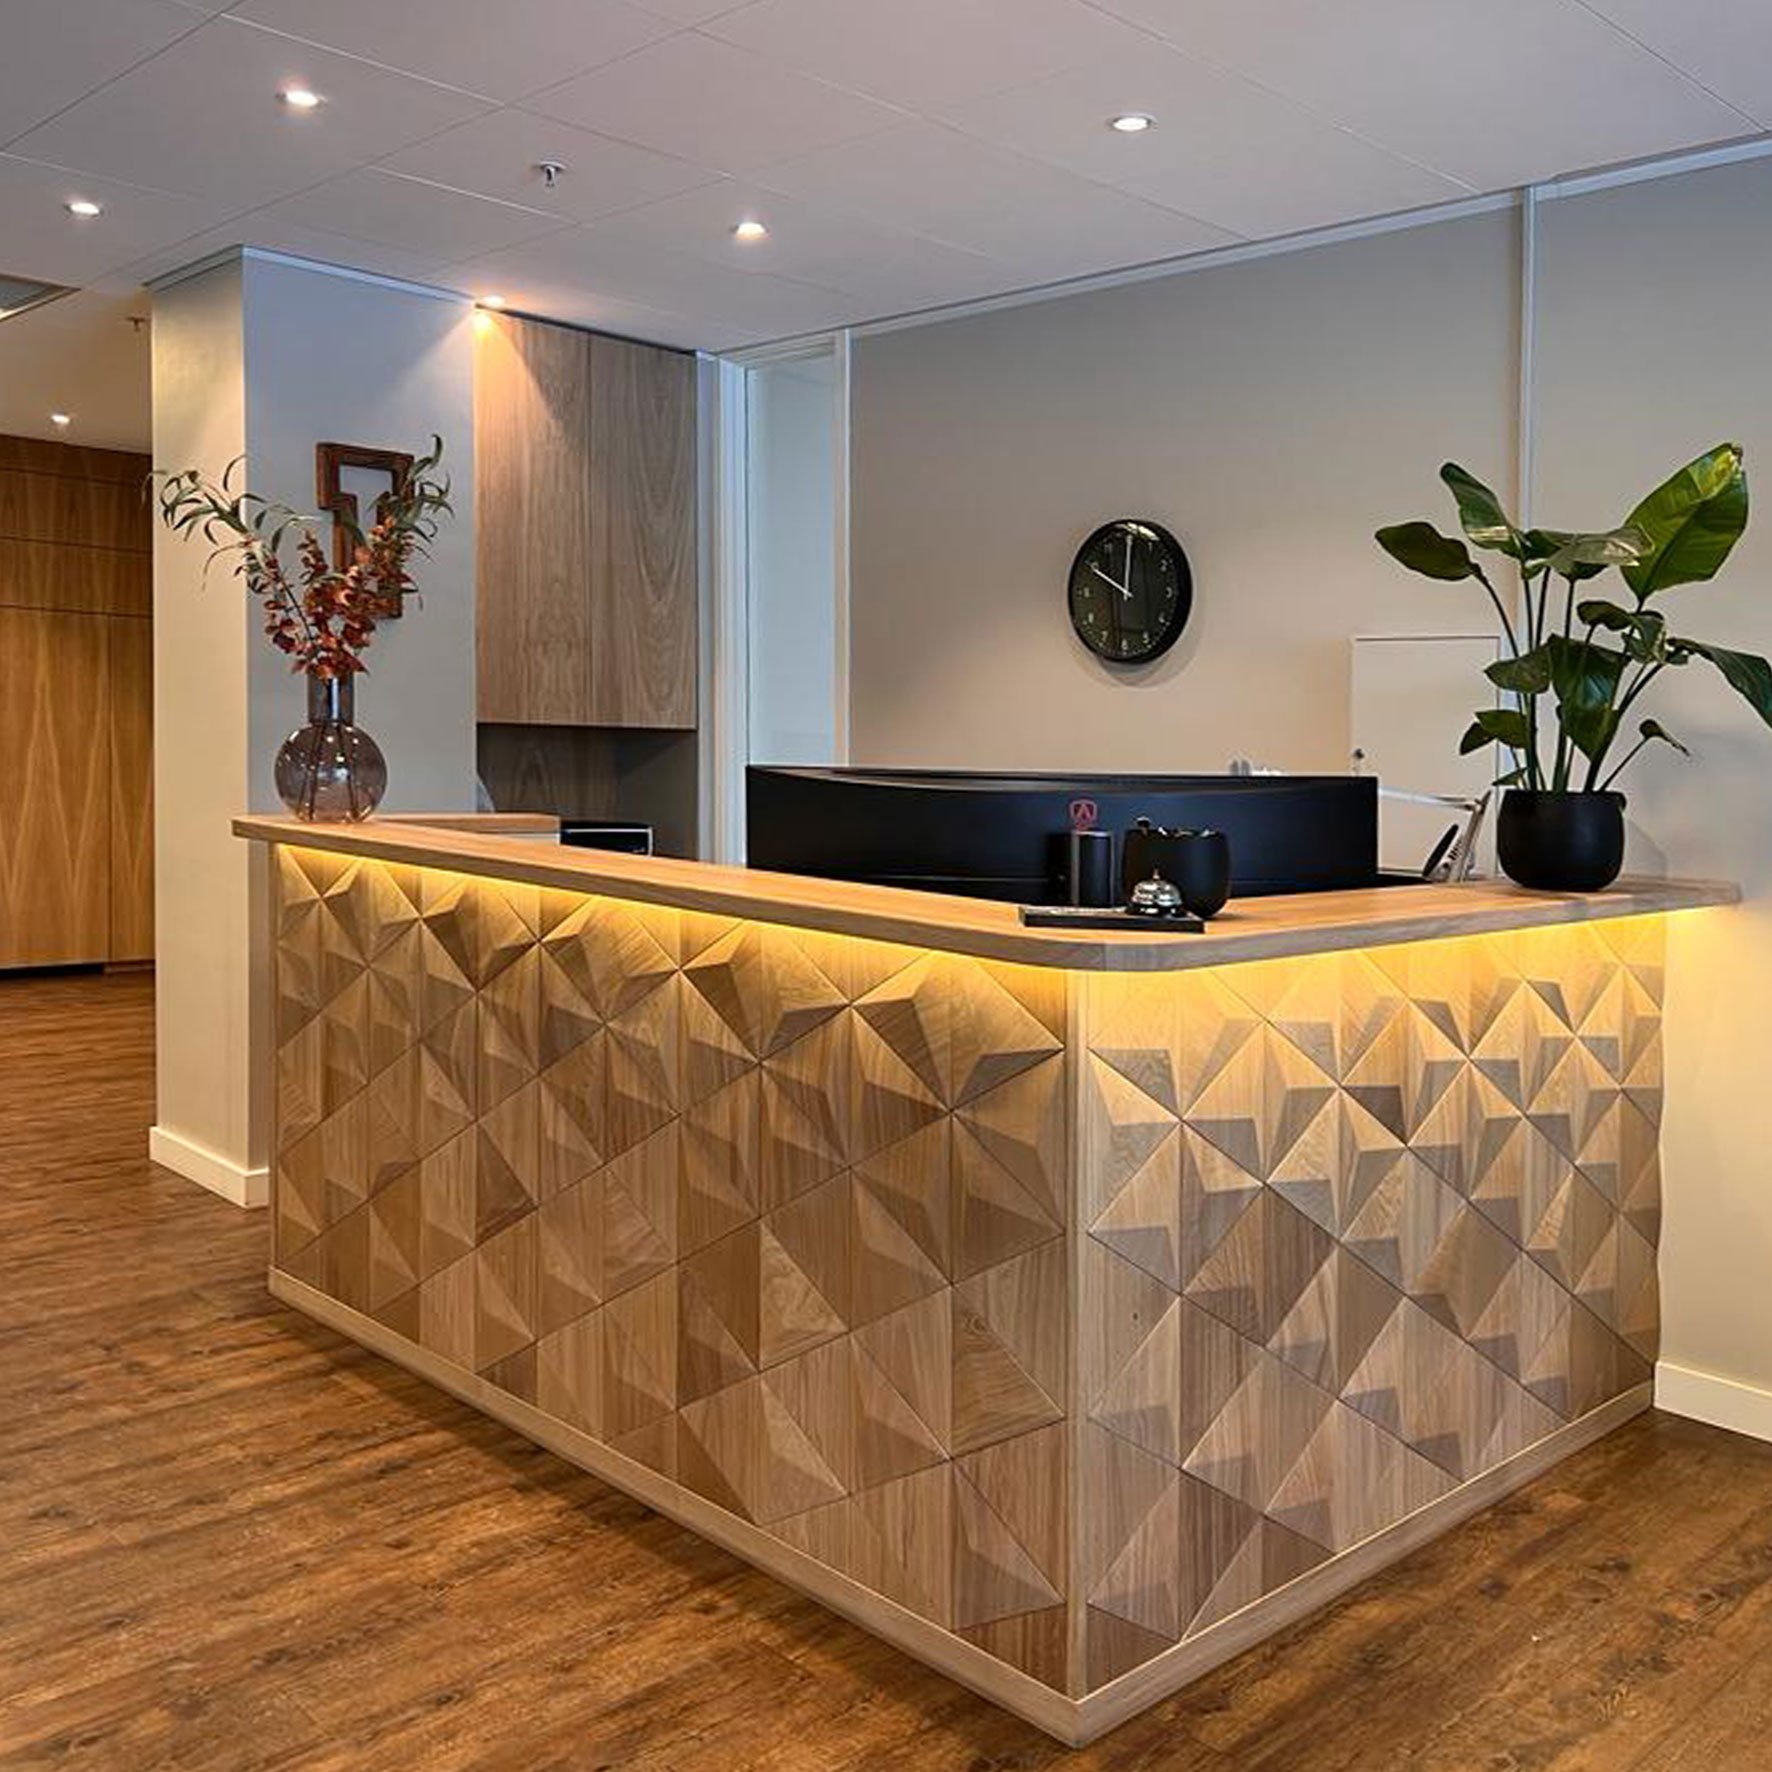 3D Decorative Wall Panelling for hotel reception desk